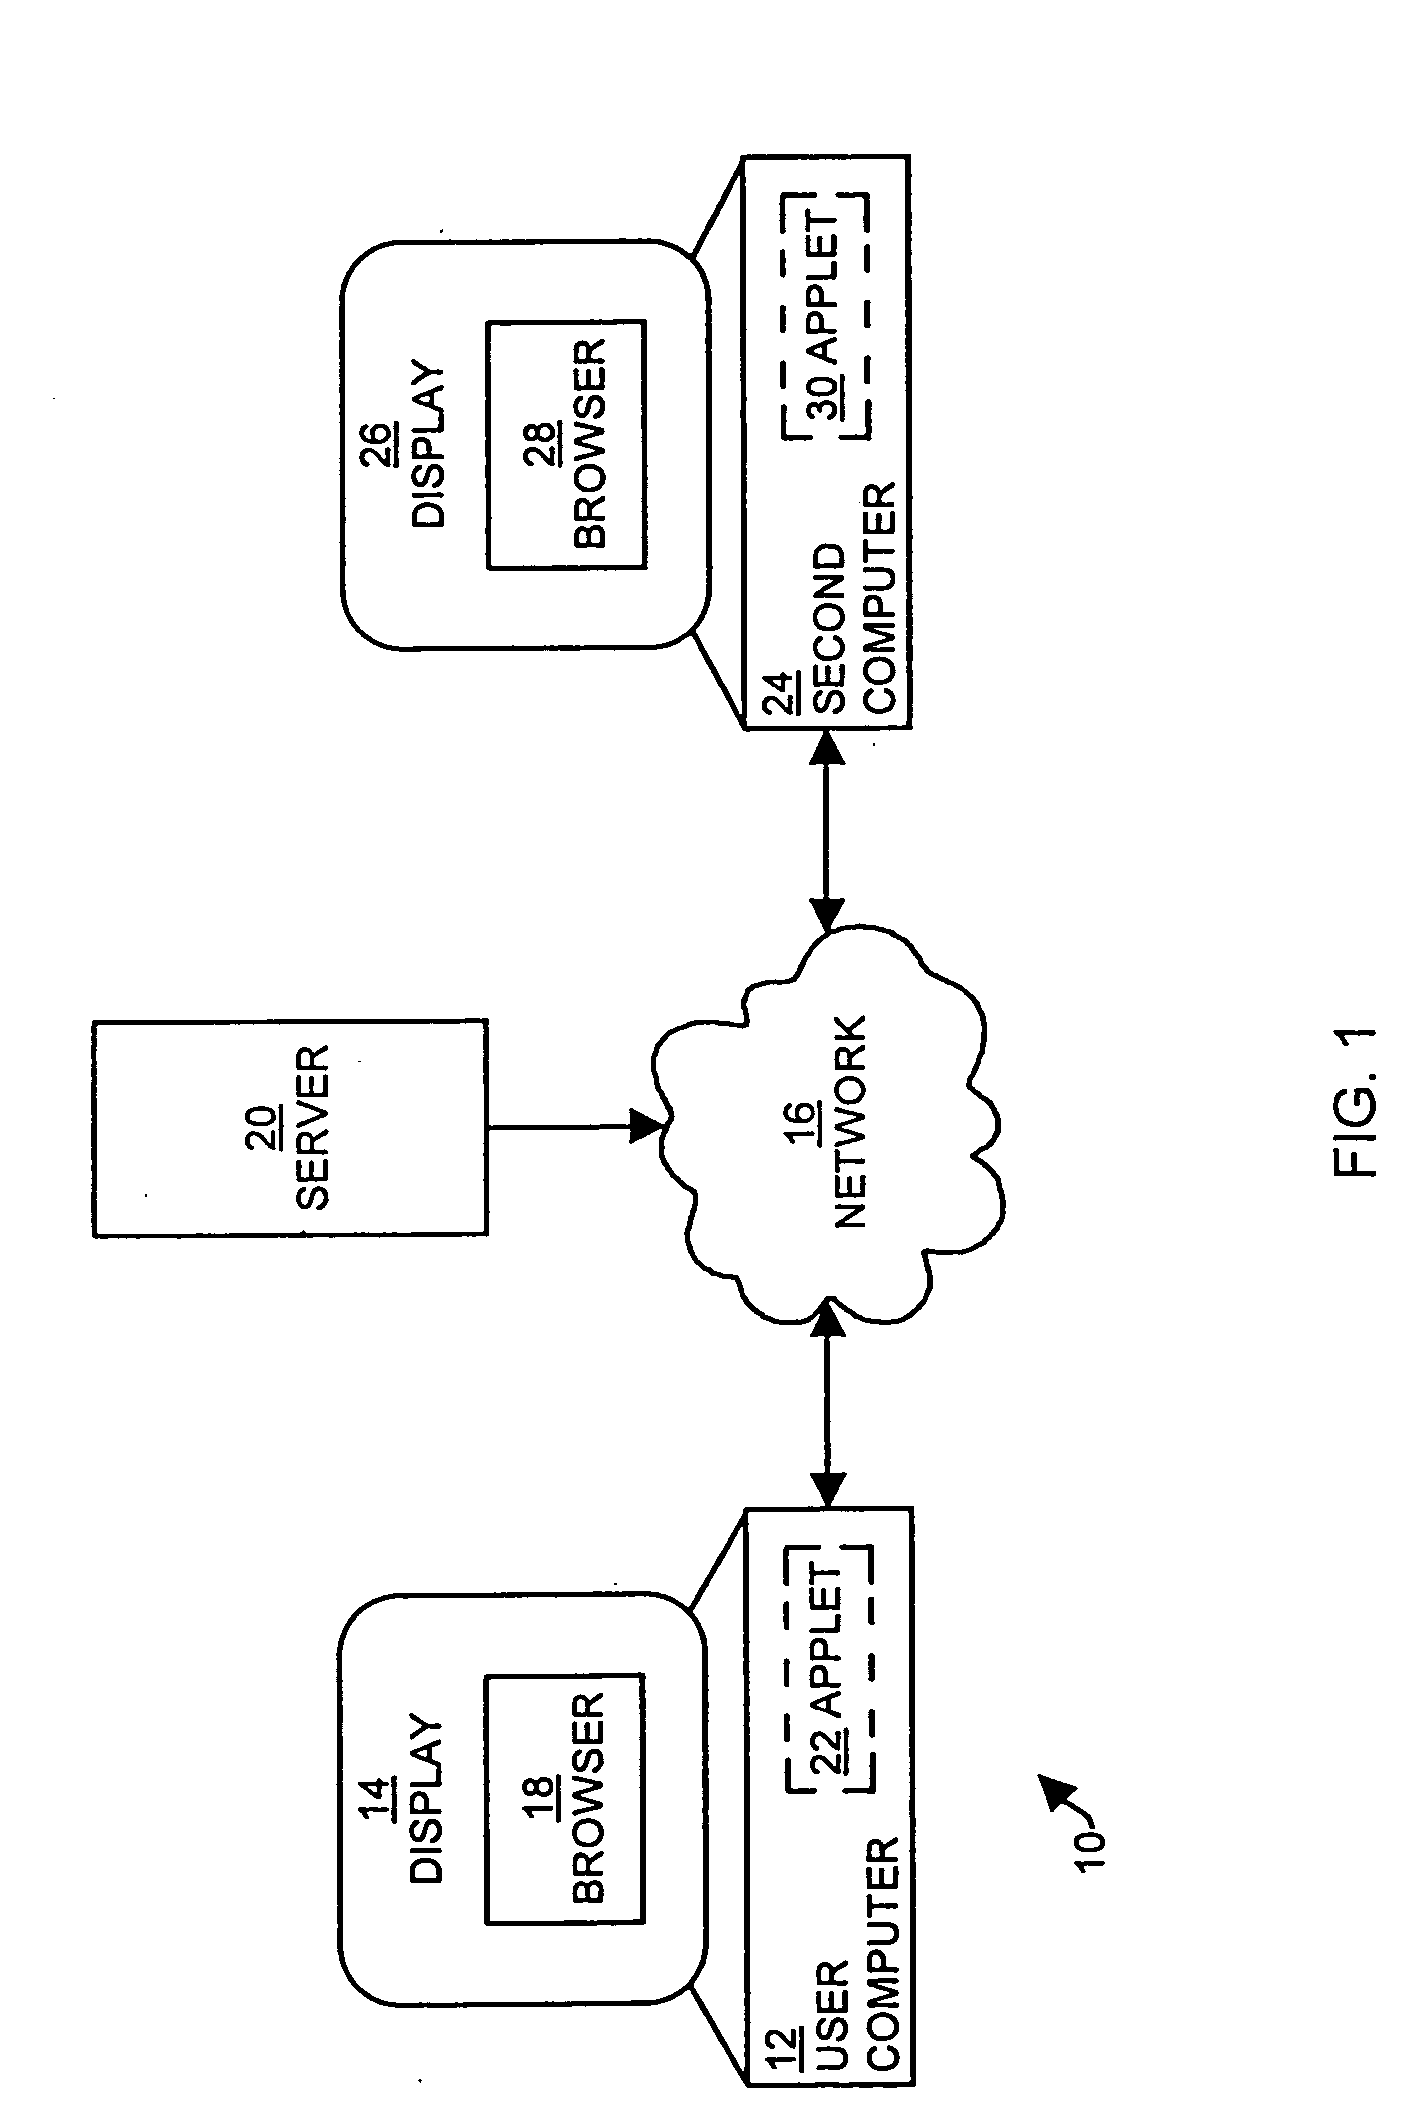 Method and apparatus for coordinating internet multi-media content with telephone and audio communications